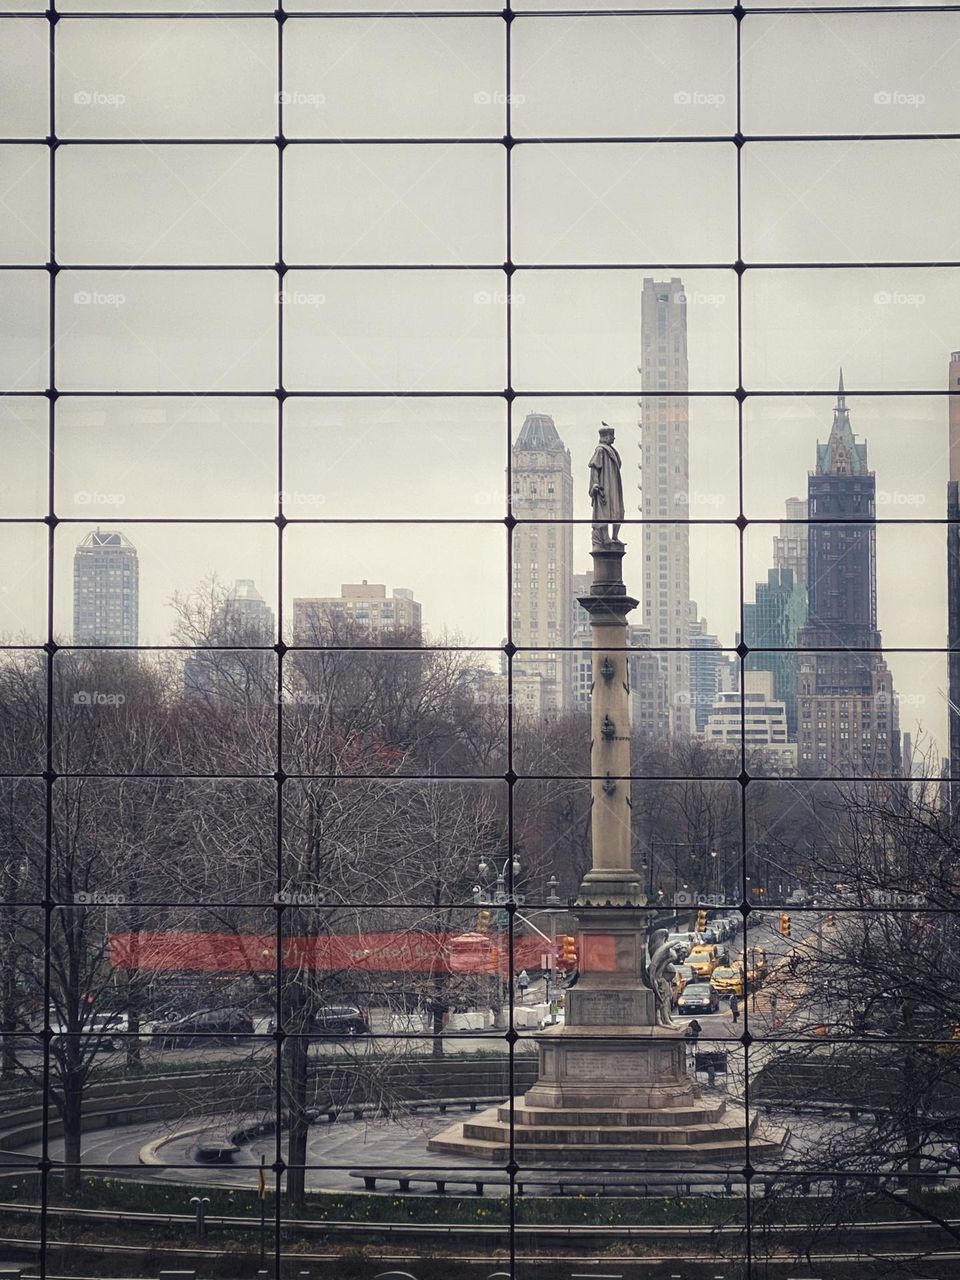 Columbus Circle in New York City seen from inside the mall